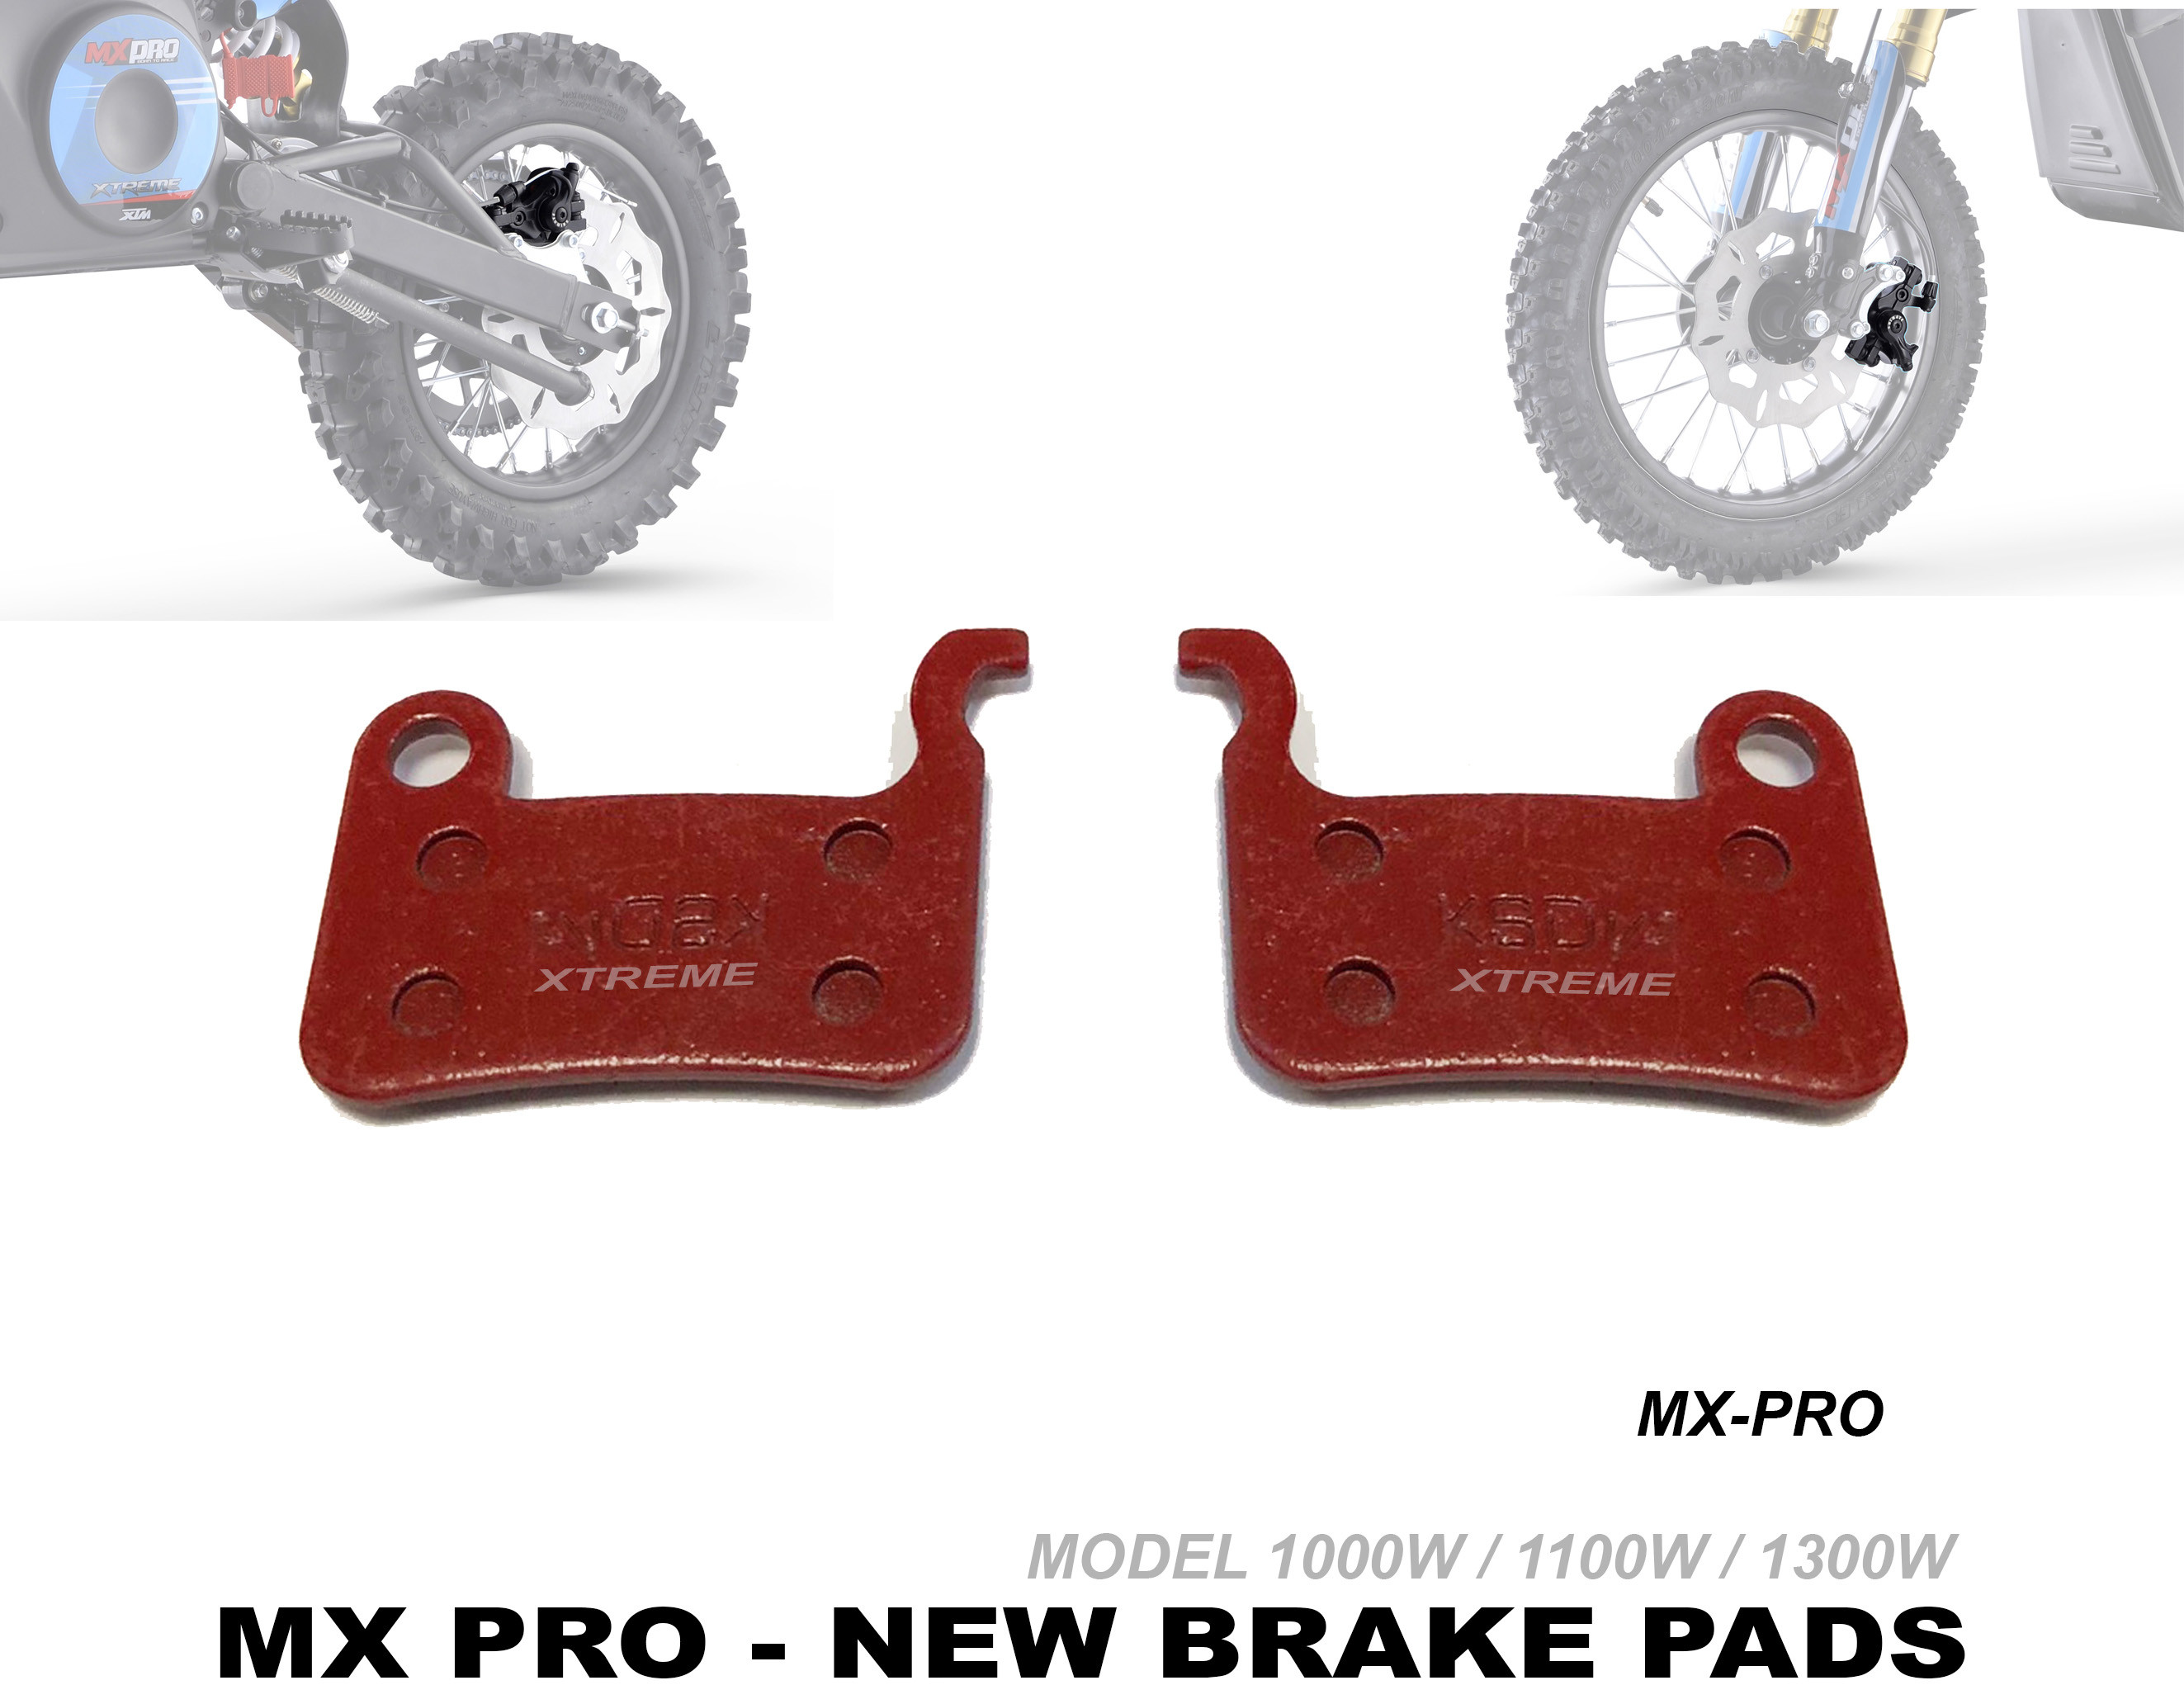 XTREME ELECTRIC XTM MX-PRO 36V REPLACEMENT FRONT AND REAR BRAKE PADS